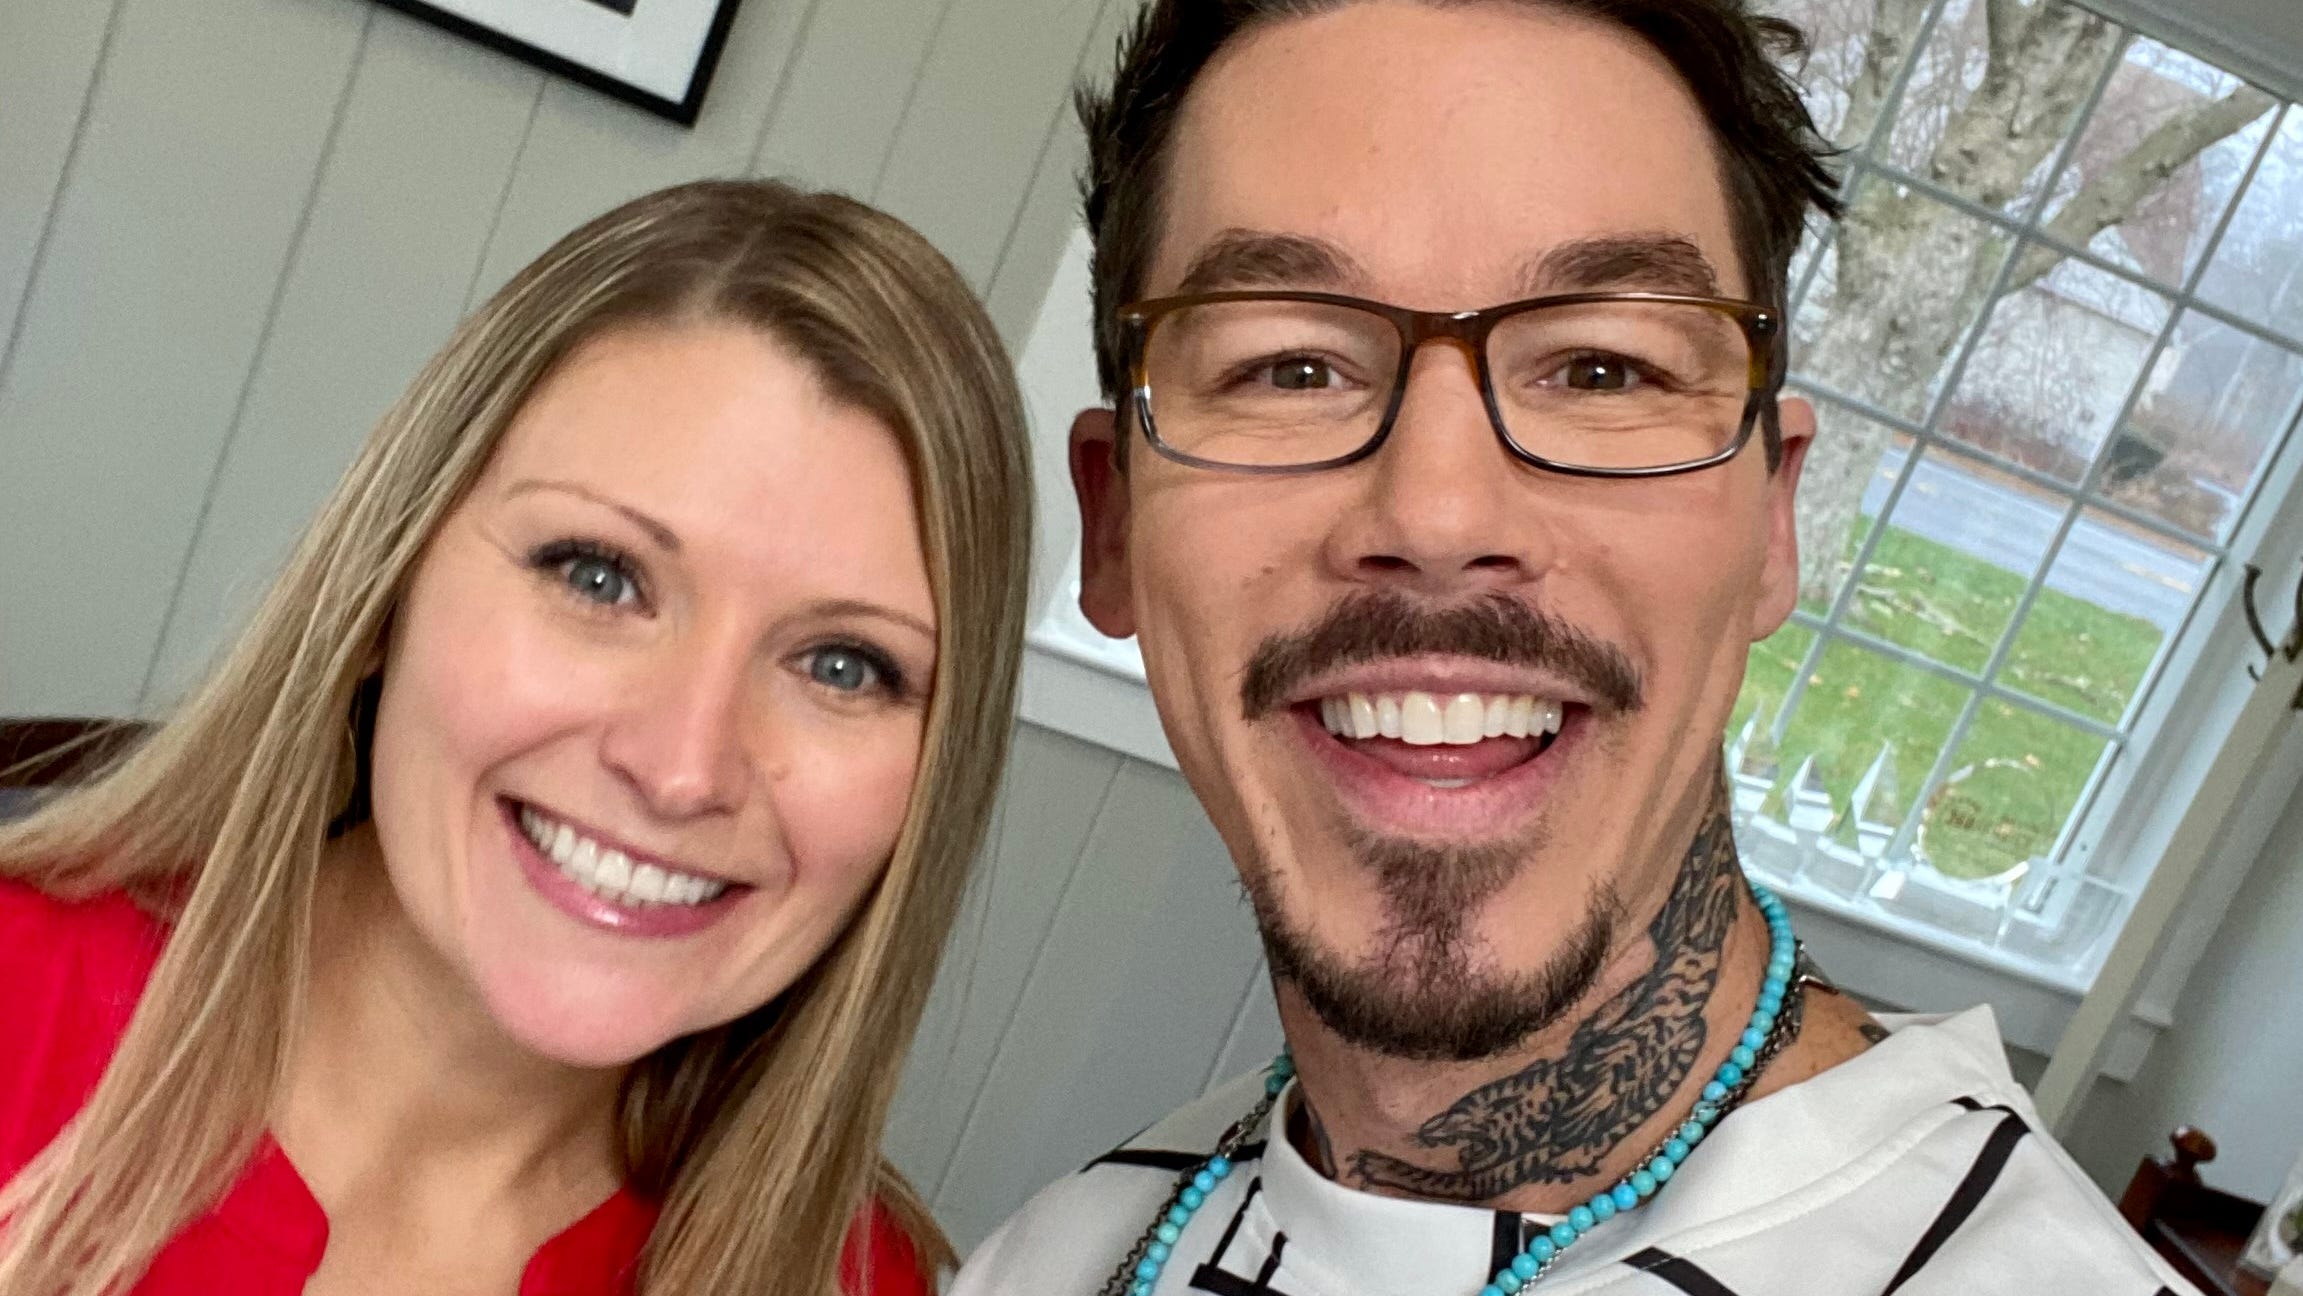 'My Lottery Dream Home' on Cape Cod episode of HGTV's David Bromstad